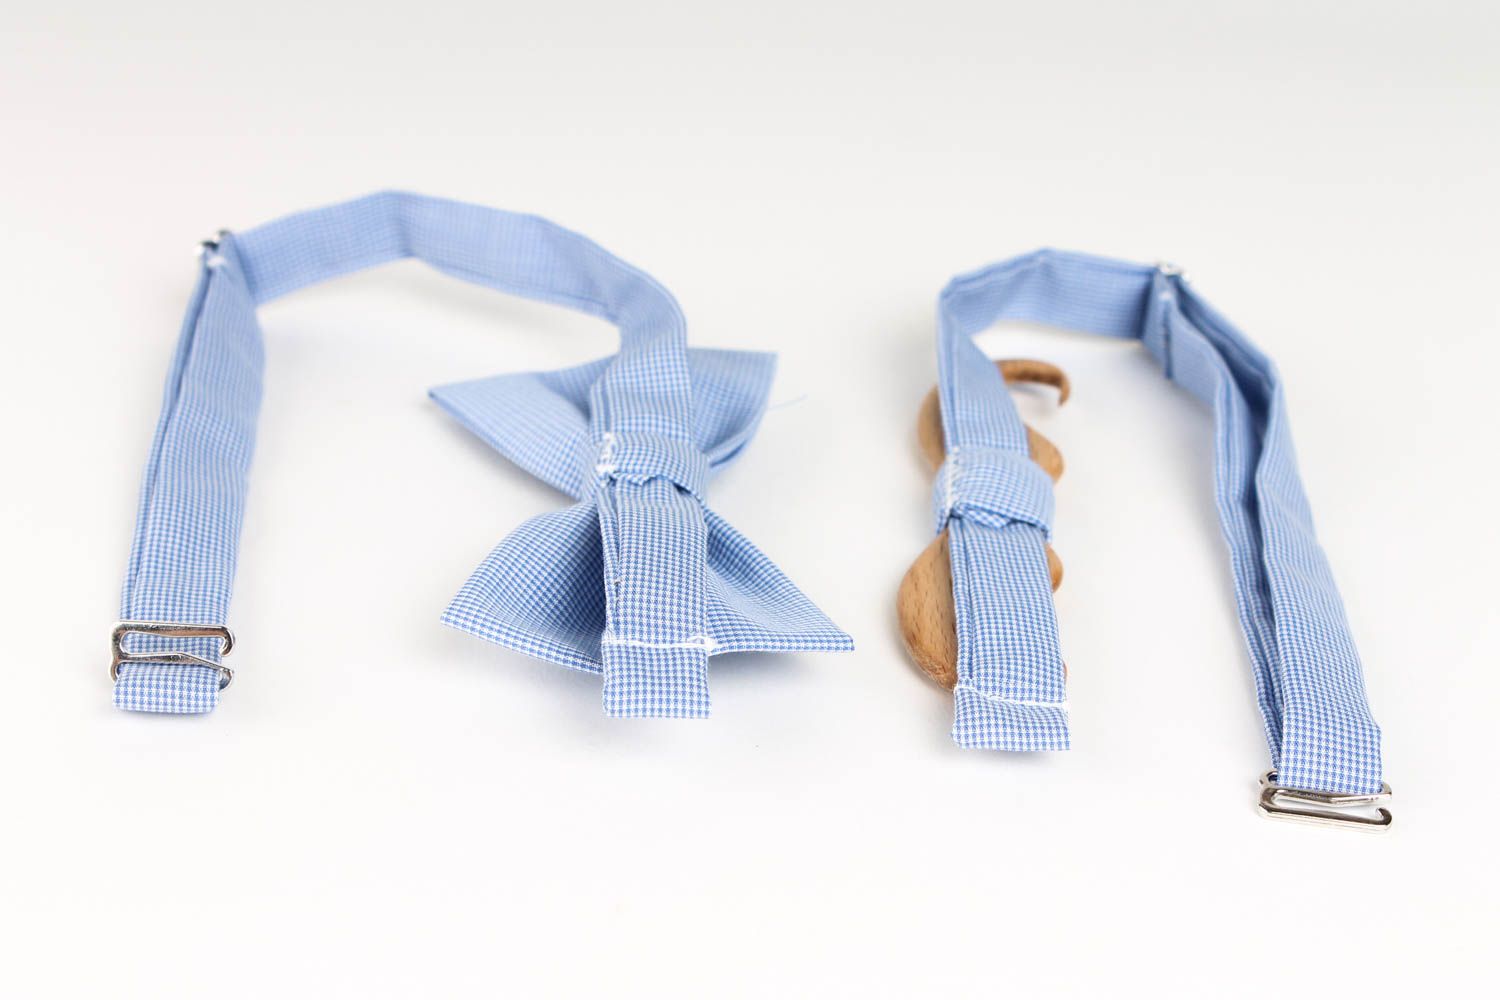 Handmade designer bow ties 2 stylish bow ties textile and wooden bow ties photo 3